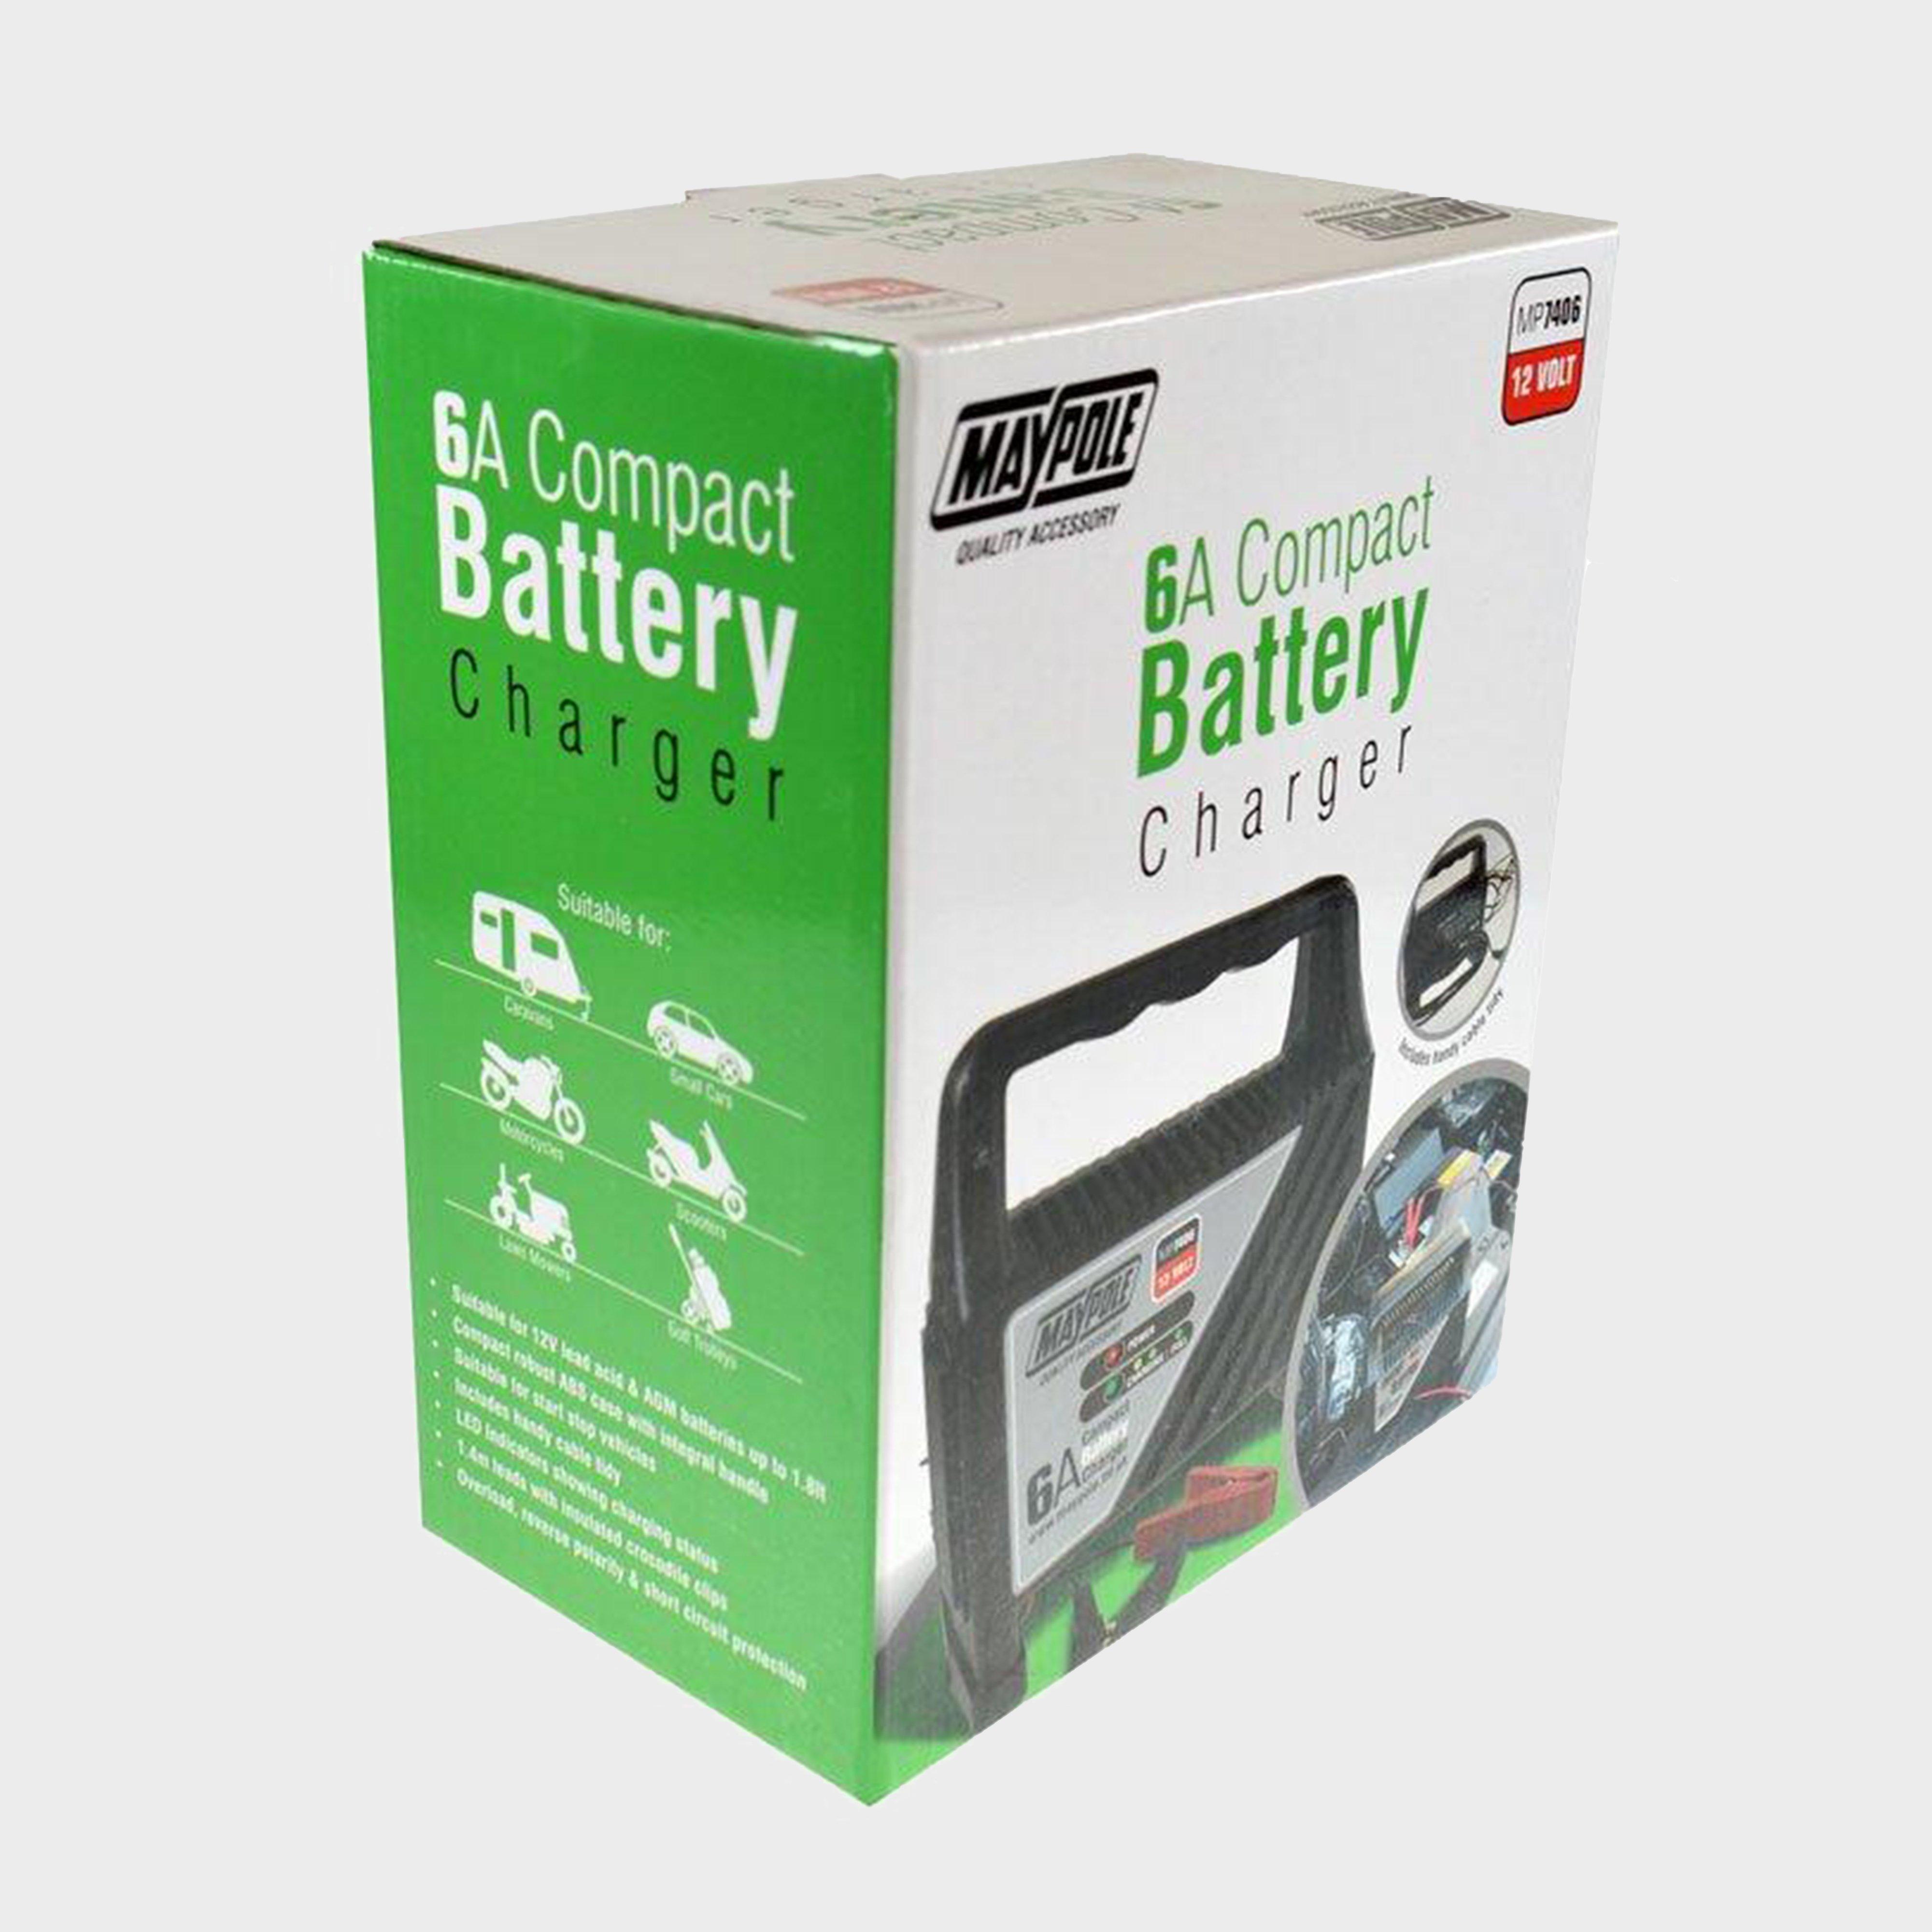 Maypole Compact Battery Charger 6A Review